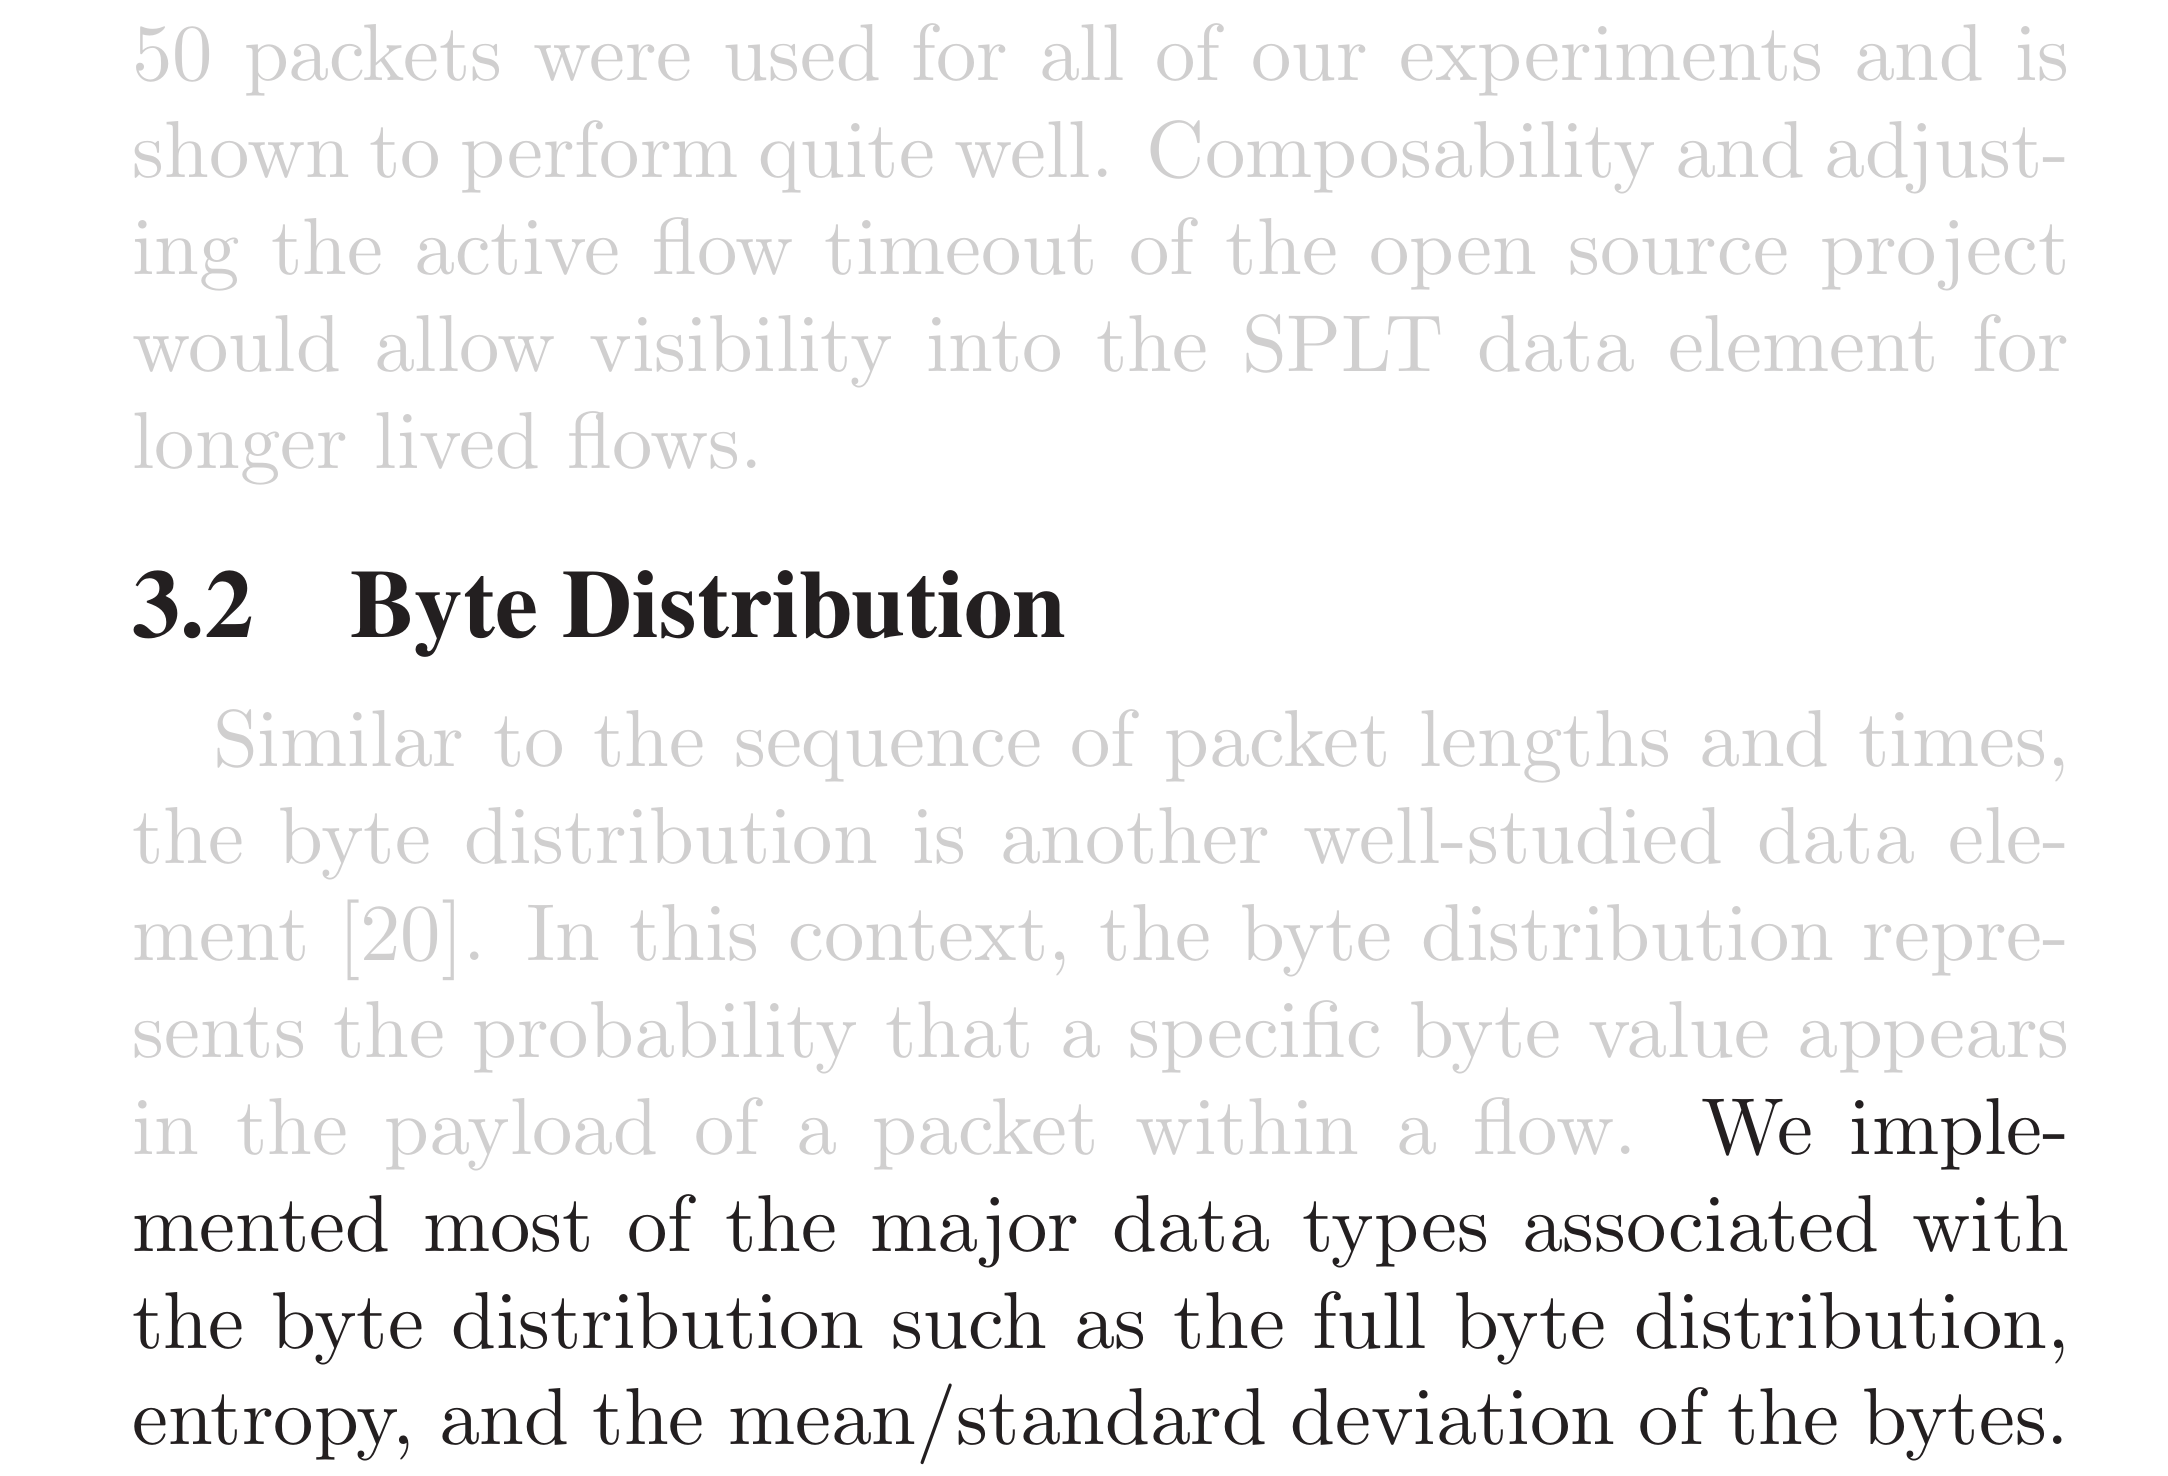 50 packets were used for all of our experiments and is shown to perform quite well. Composability and adjusting the active flow timeout of the open source project would allow visibility into the SPLT data element for longer lived flows.

3.2  Byte Distribution. Similar to the sequence of packet lengths and times, the byte distribution is another well-studied data element. In this context, the byte distribution represents the probability that a specific byte value appears in the payload of a packet within a flow.  We implemented most of the major data types associated with the byte distribution such as the full byte distribution, entropy, and the mean/standard deviation of the bytes.